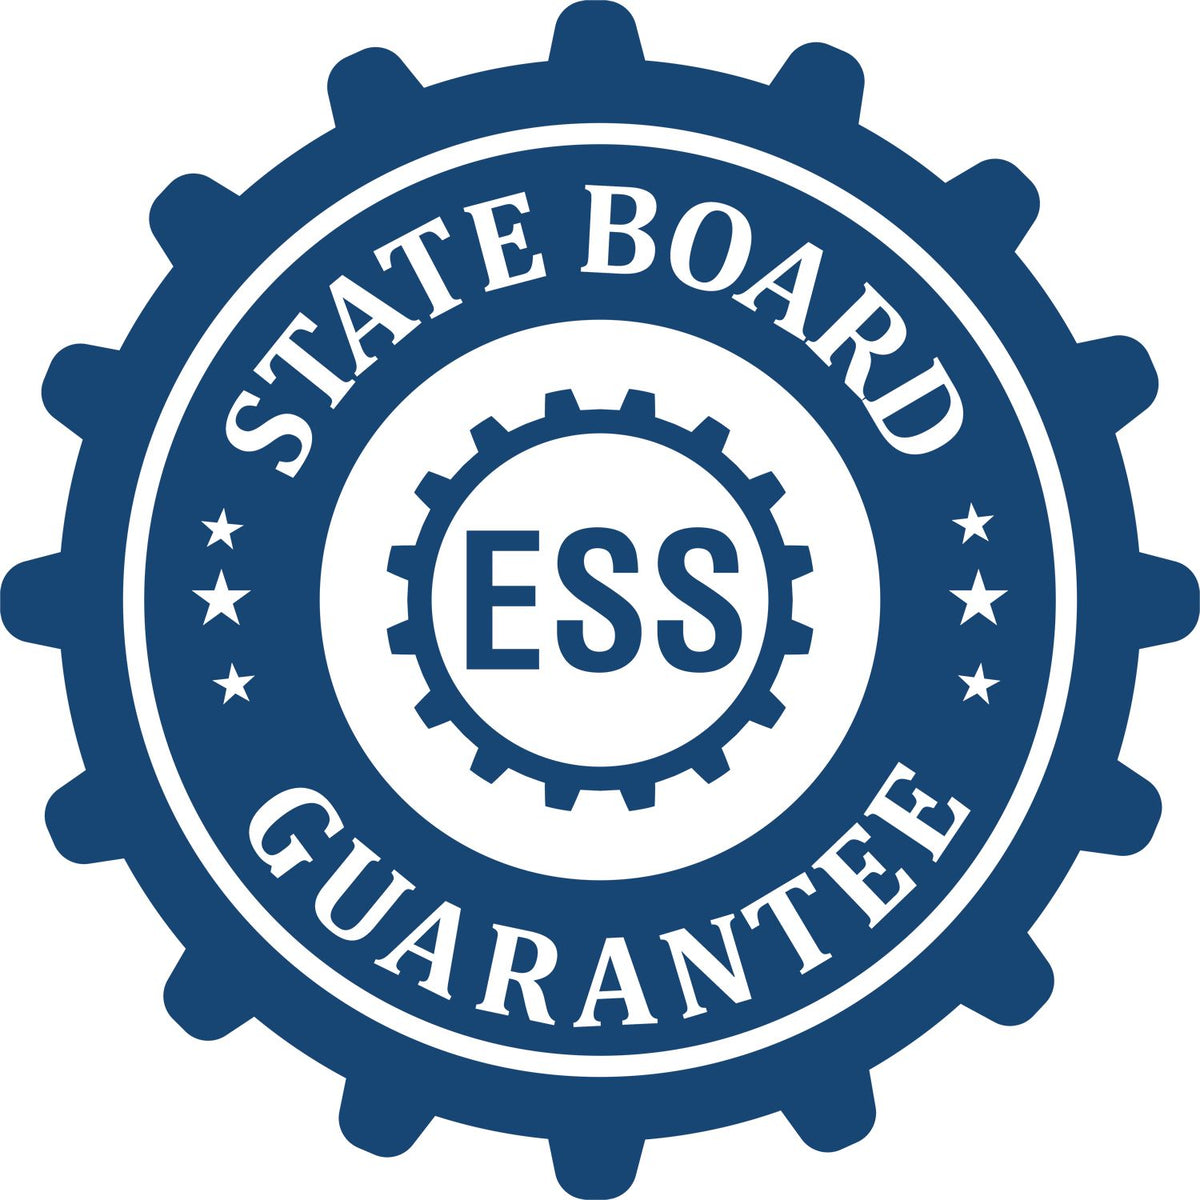 An emblem in a gear shape illustrating a state board guarantee for the Maryland Professional Engineer Seal Stamp product.